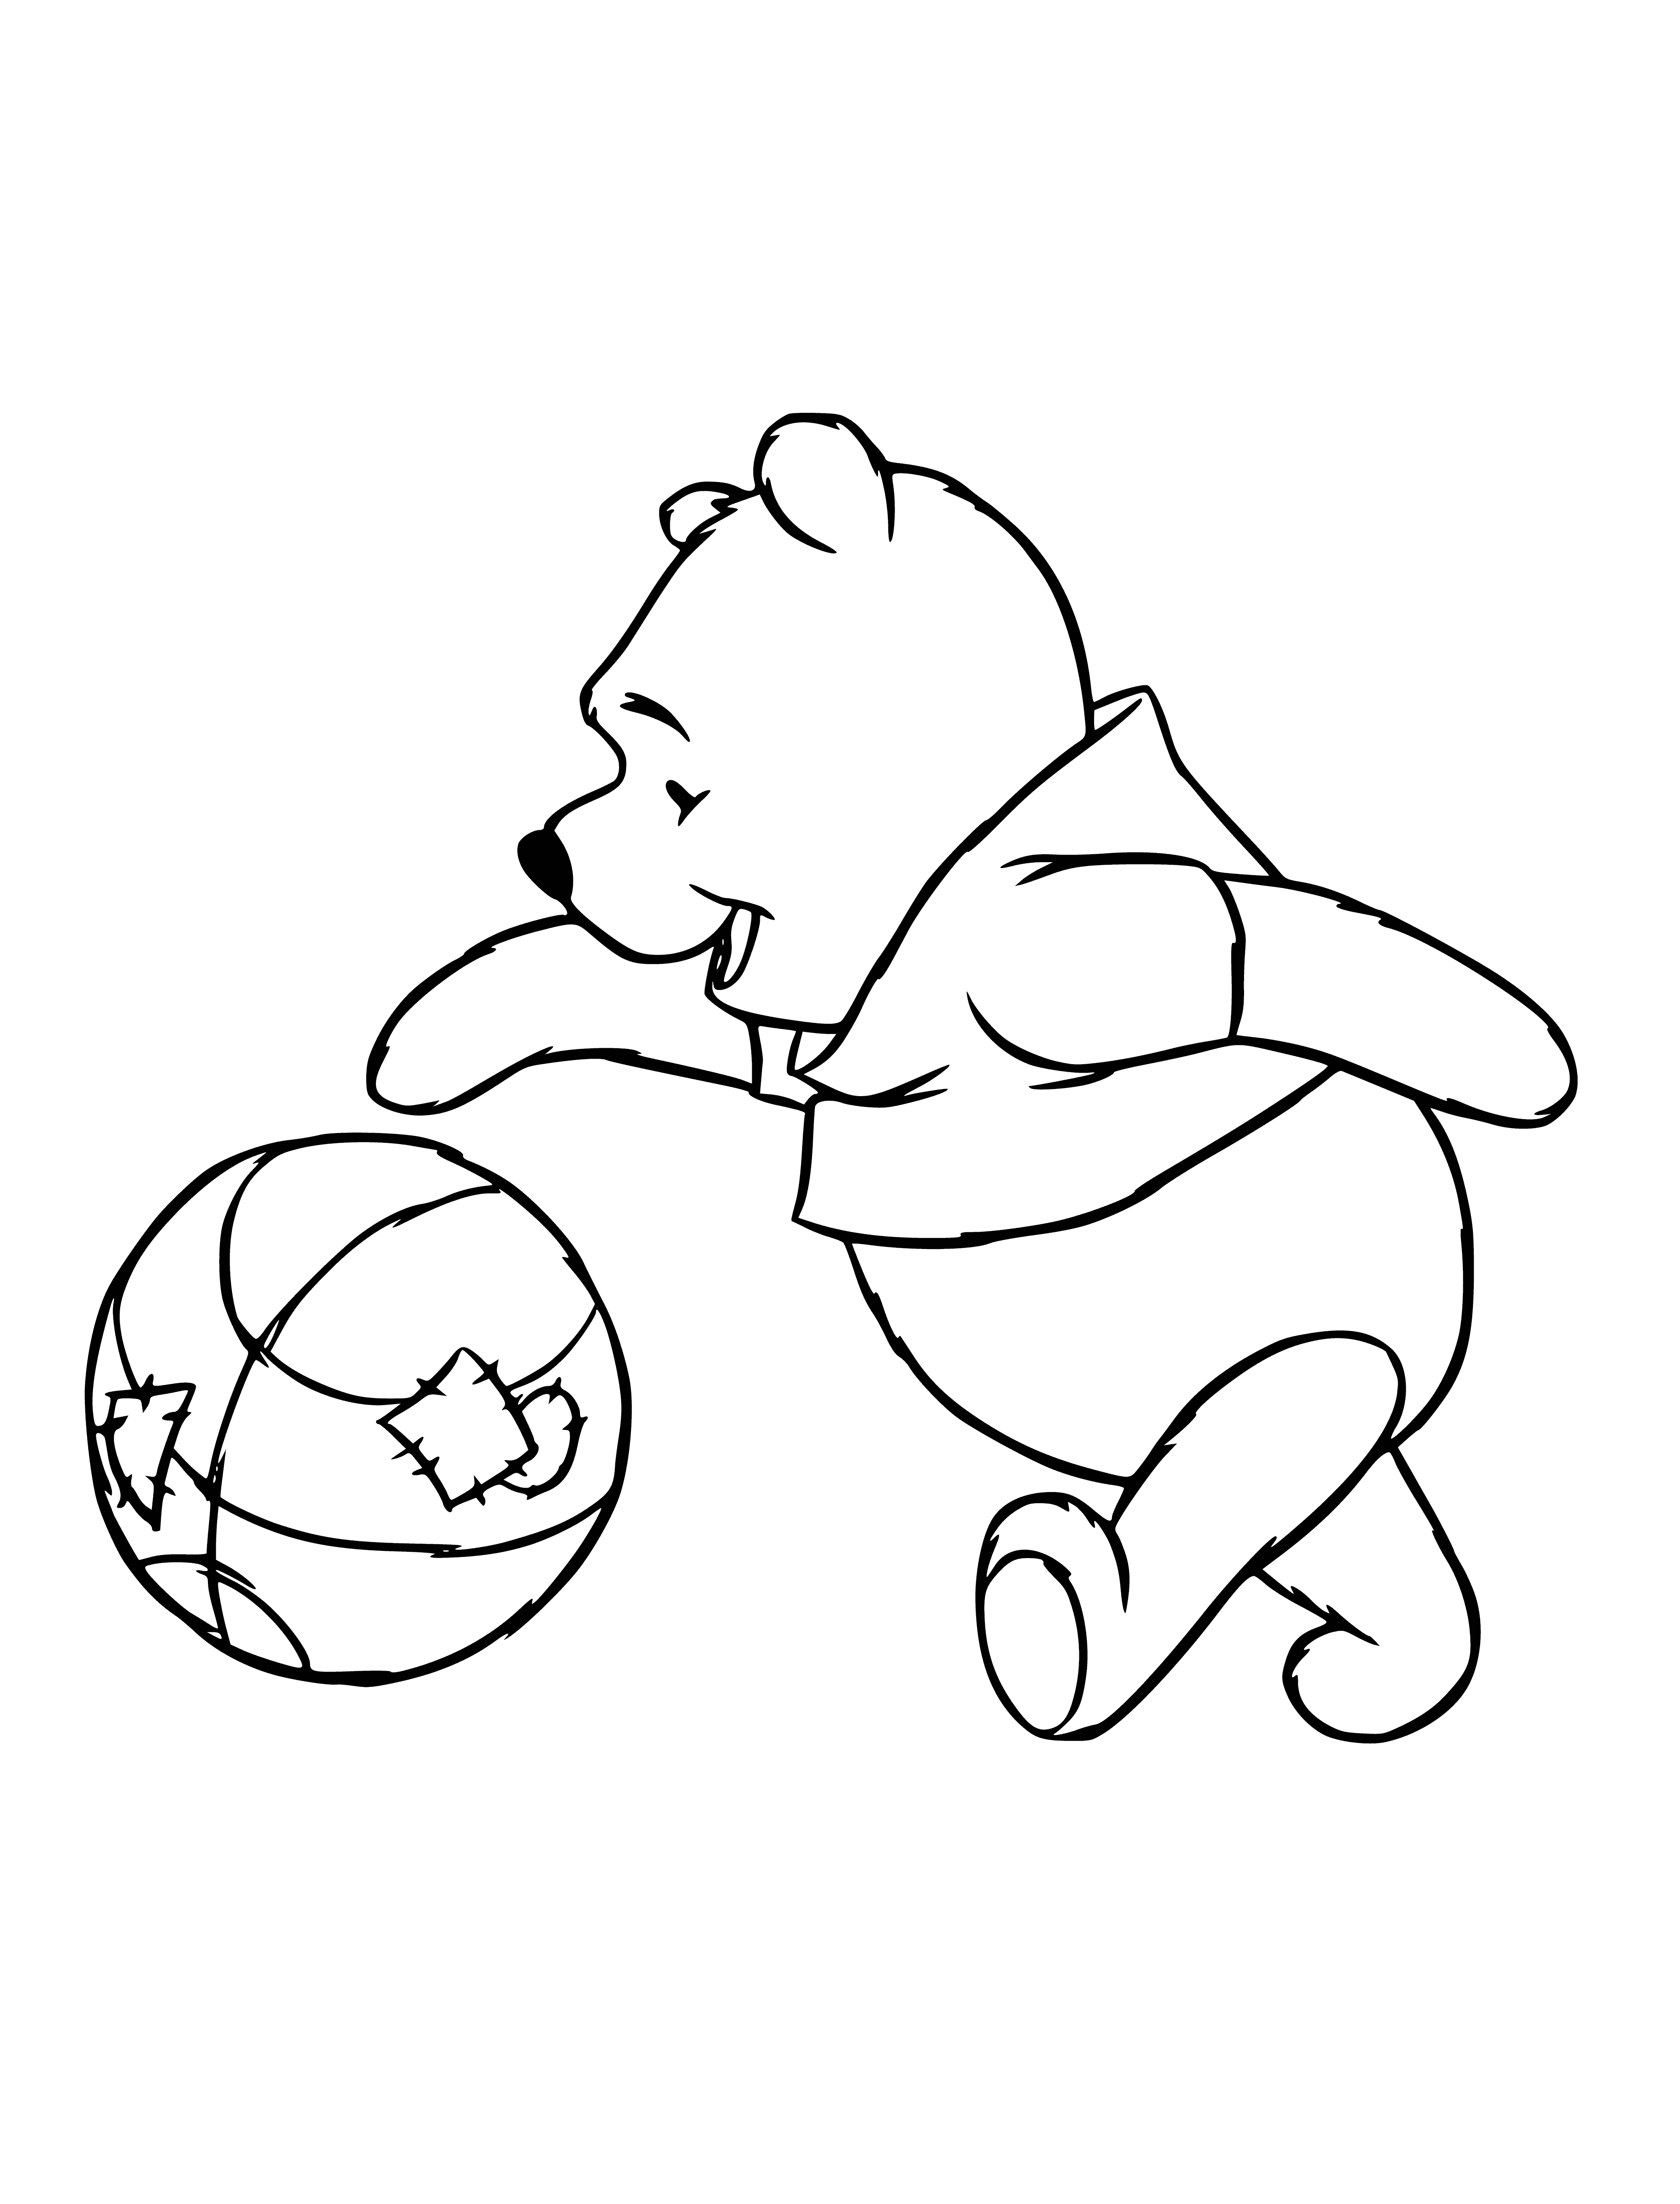 coloring page: Character from Winnie the Pooh holds red ball in both hands, yellow shirt & red collar on white background. Perfect for coloring! #coloringtime